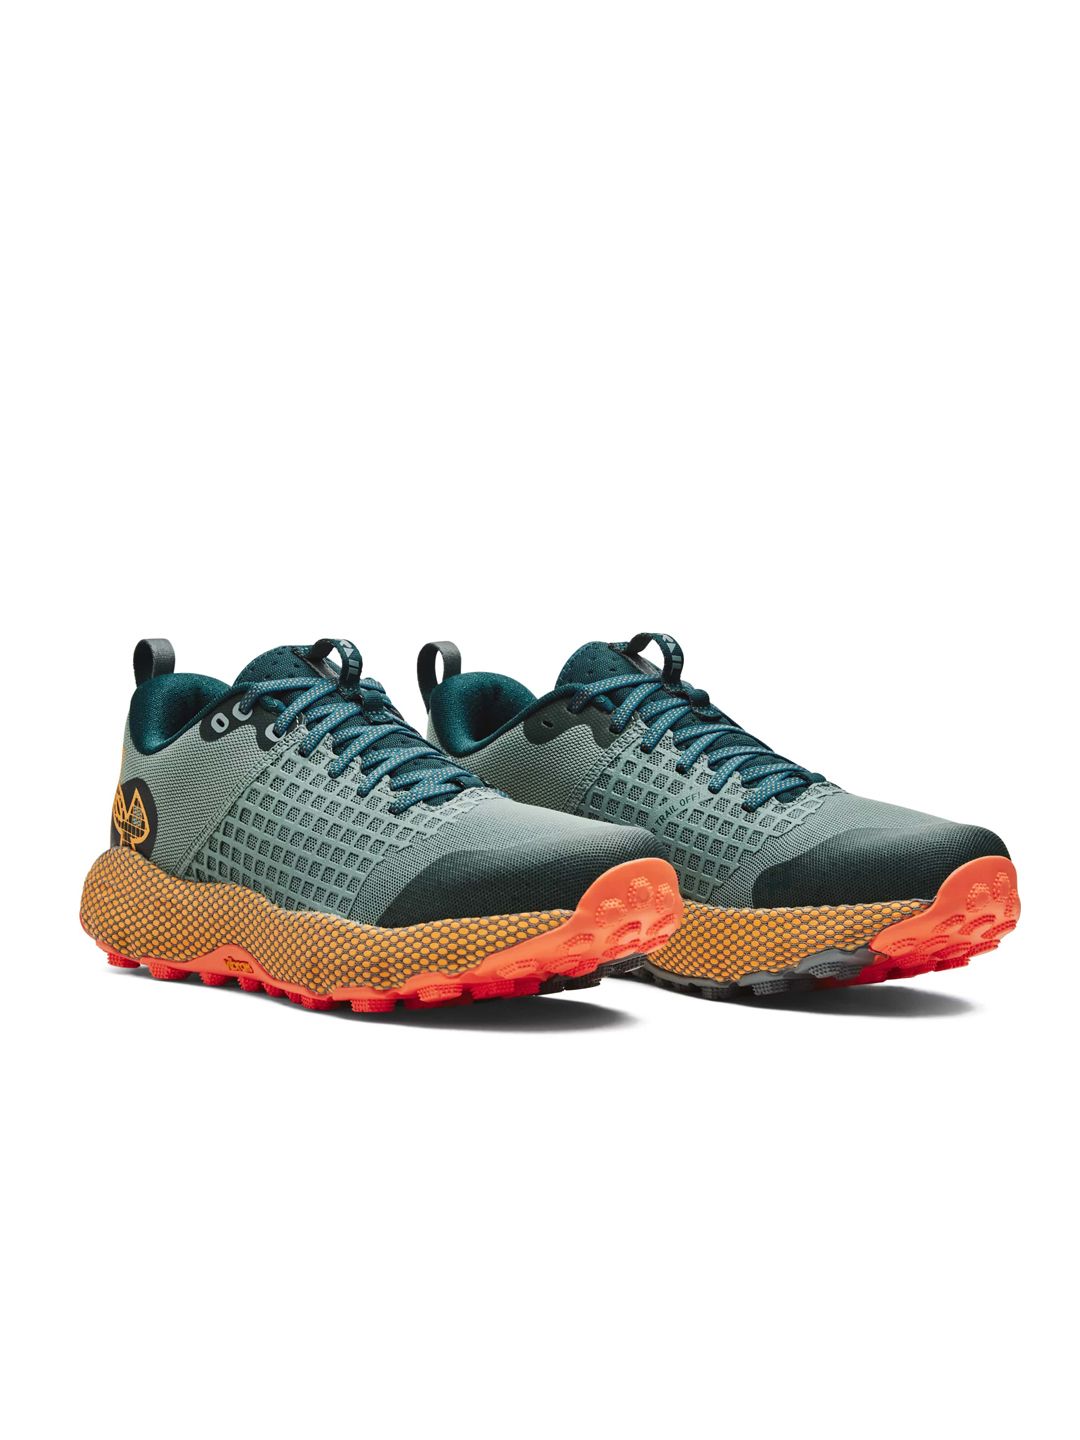 UNDER ARMOUR Unisex Self-Checked Woven Design HOVR DS Ridge Trail Running Shoes Price in India